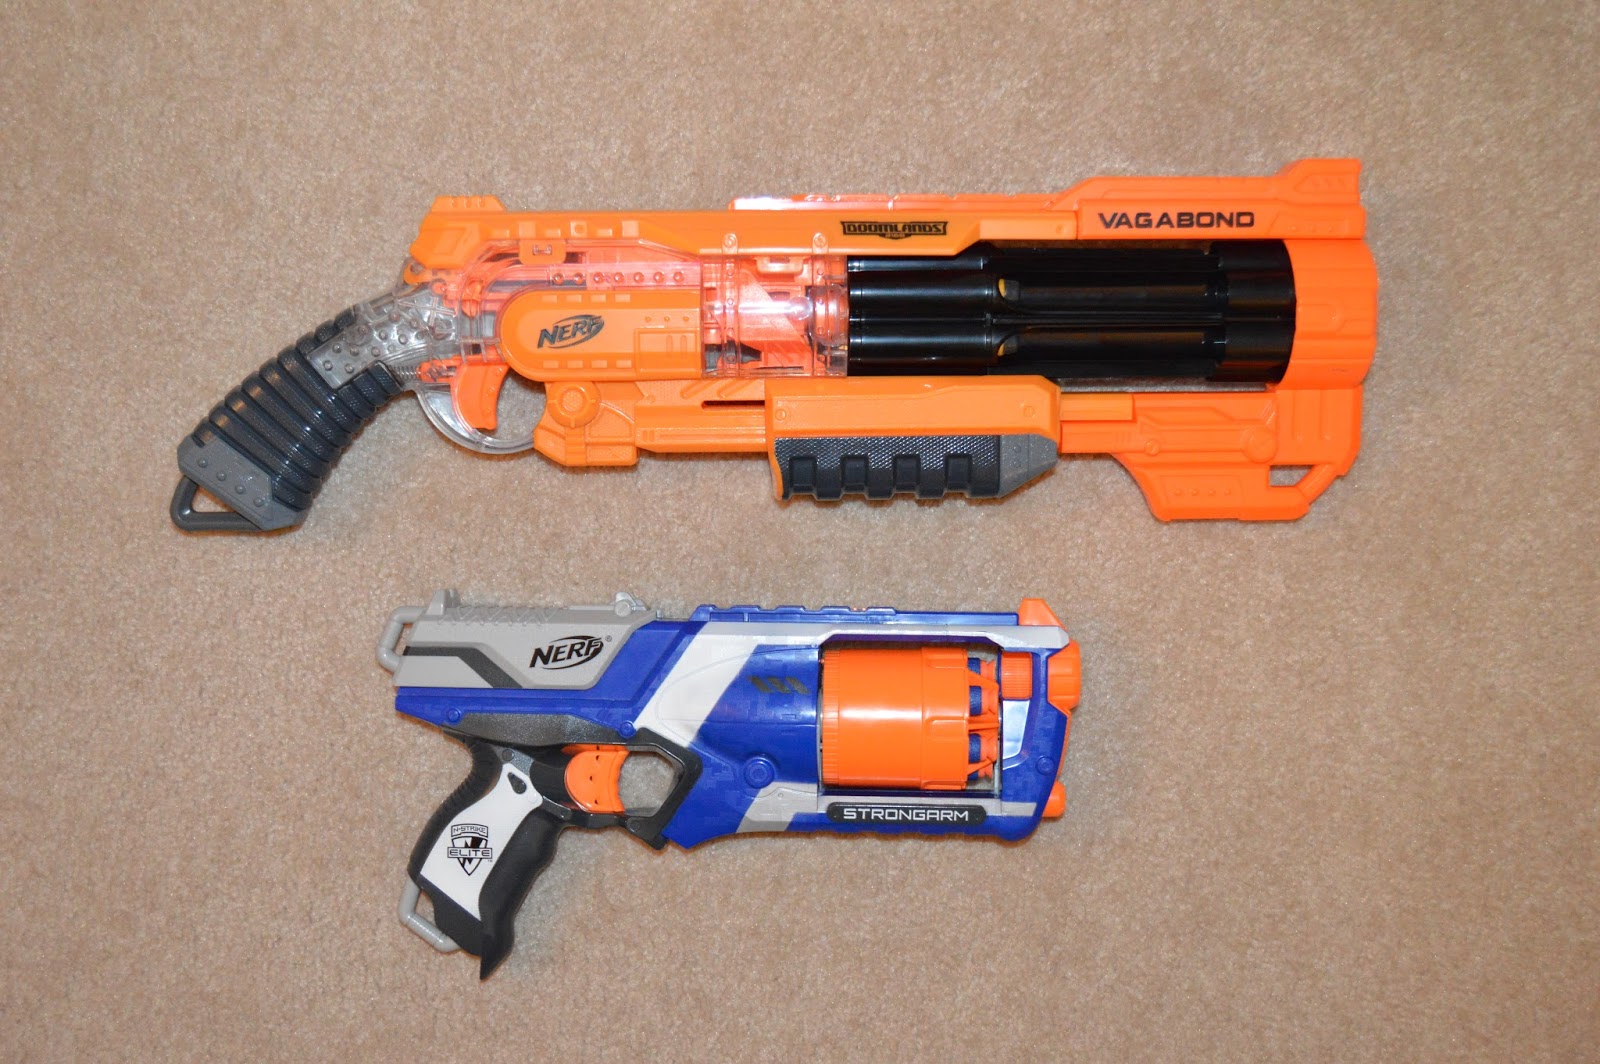 StudioYale: Nerf 2169 Review (8/10)